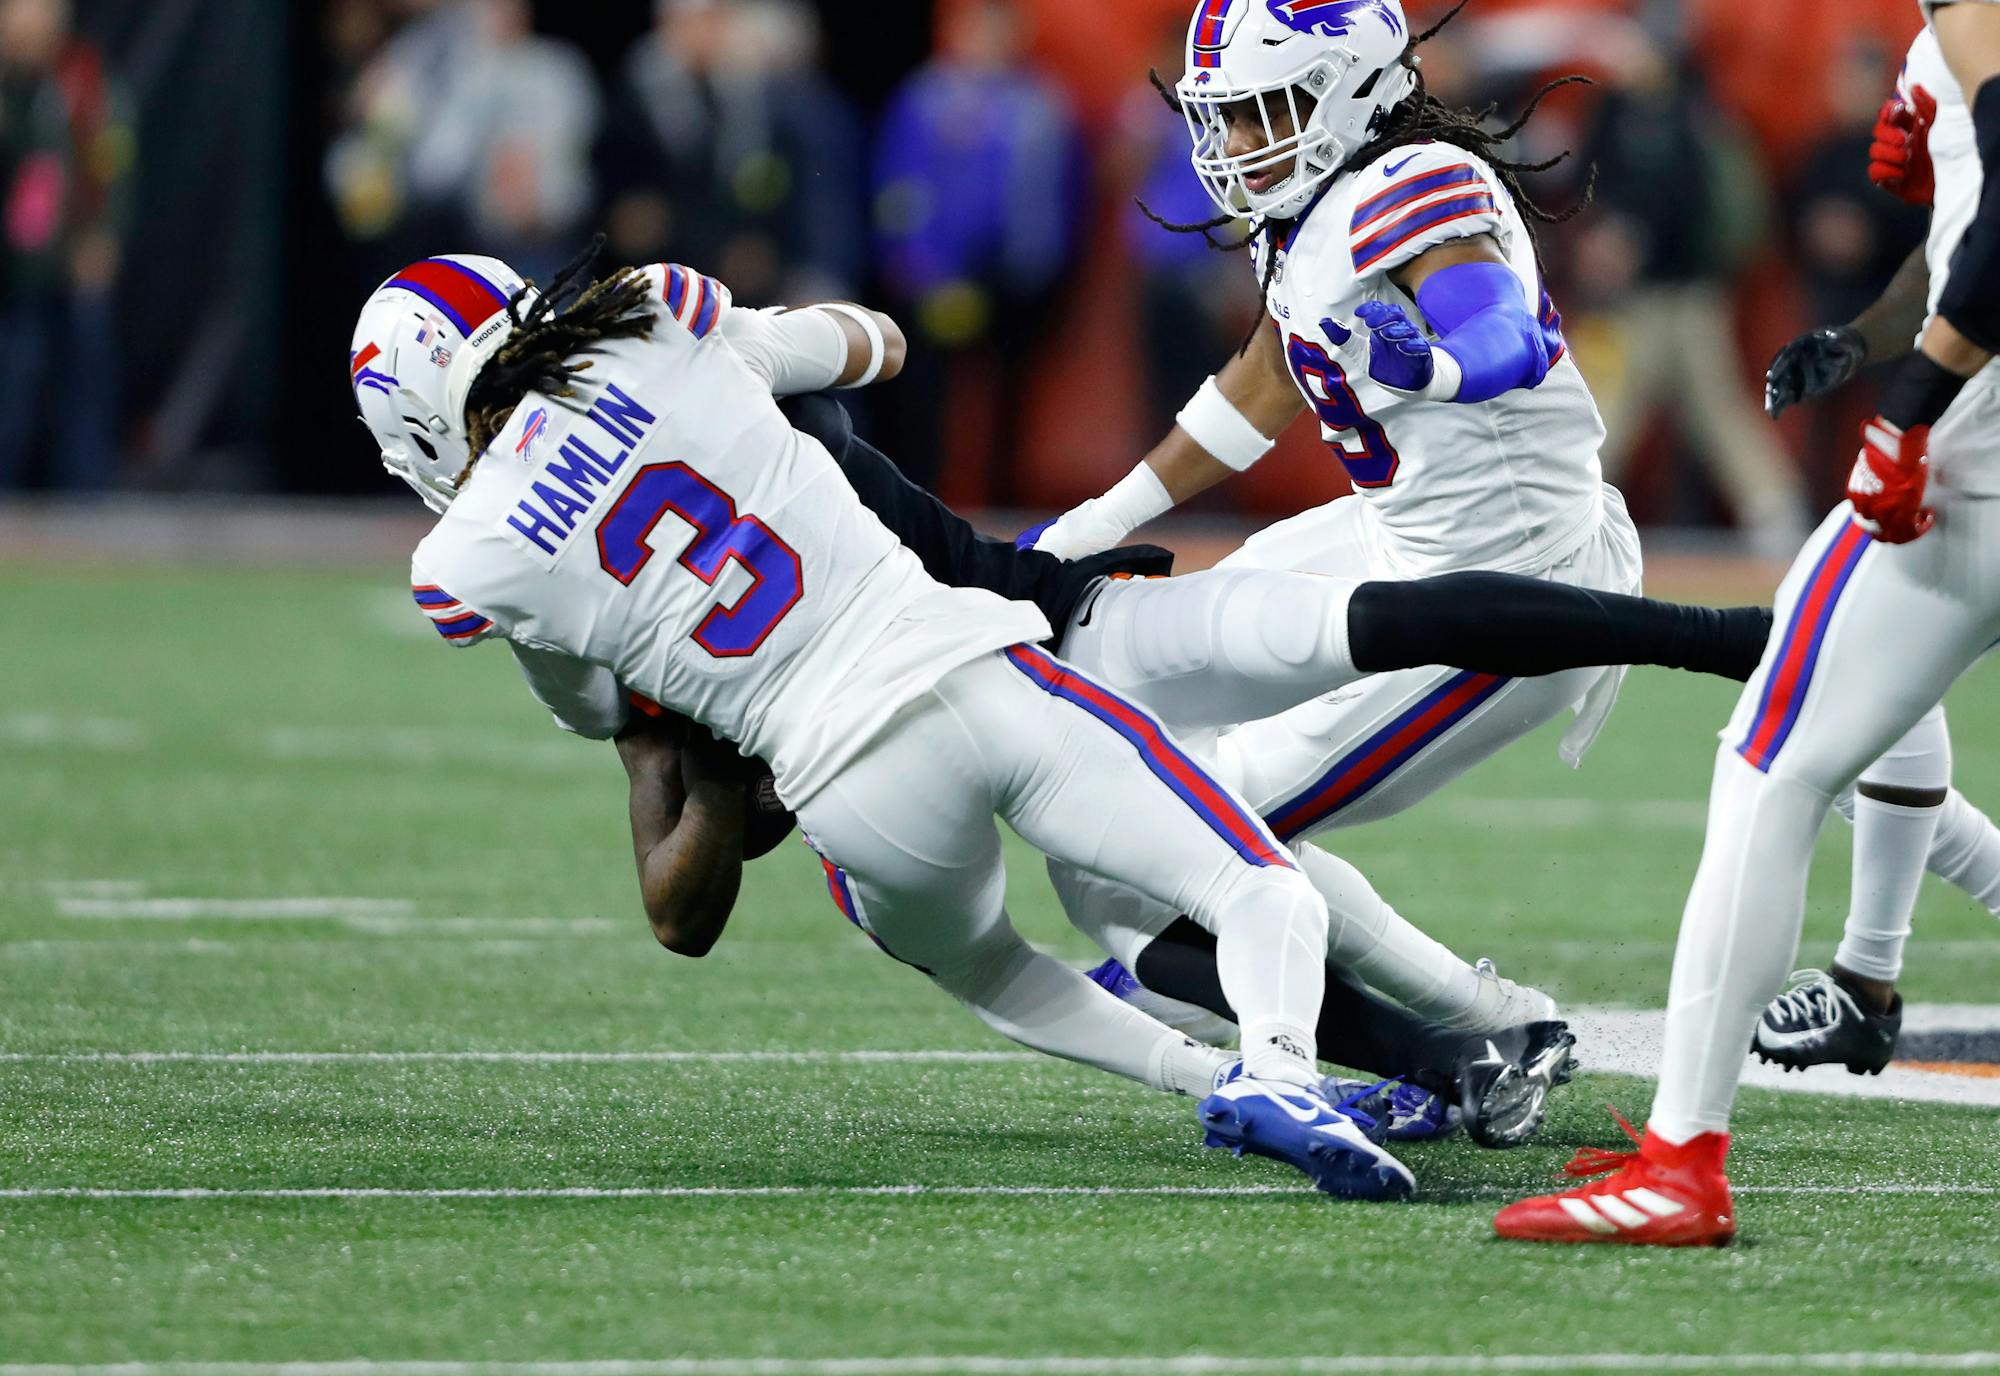 Premium: This First-Half Trend Has Us Eyeing a Specific Bet on the Bills